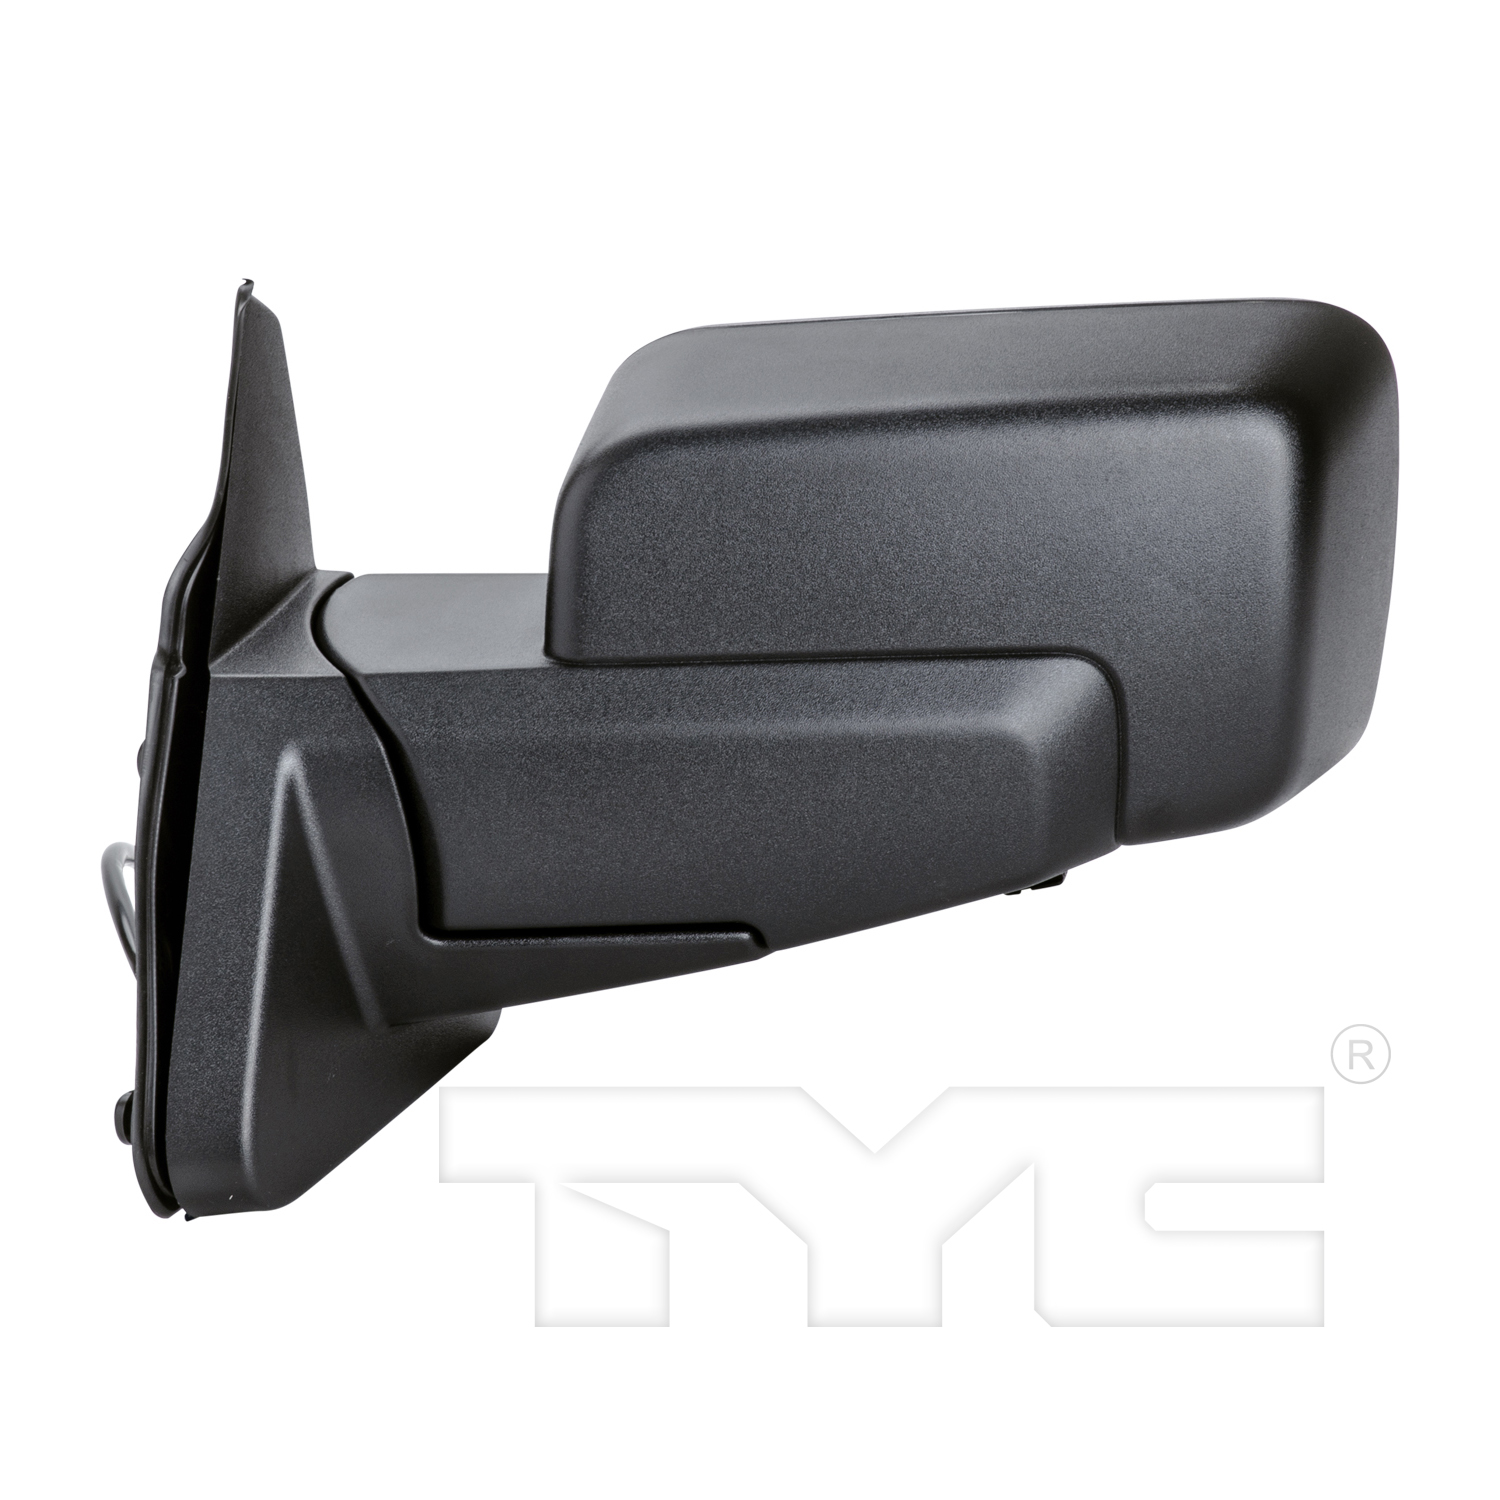 Aftermarket MIRRORS for JEEP - COMMANDER, COMMANDER,06-10,LT Mirror outside rear view